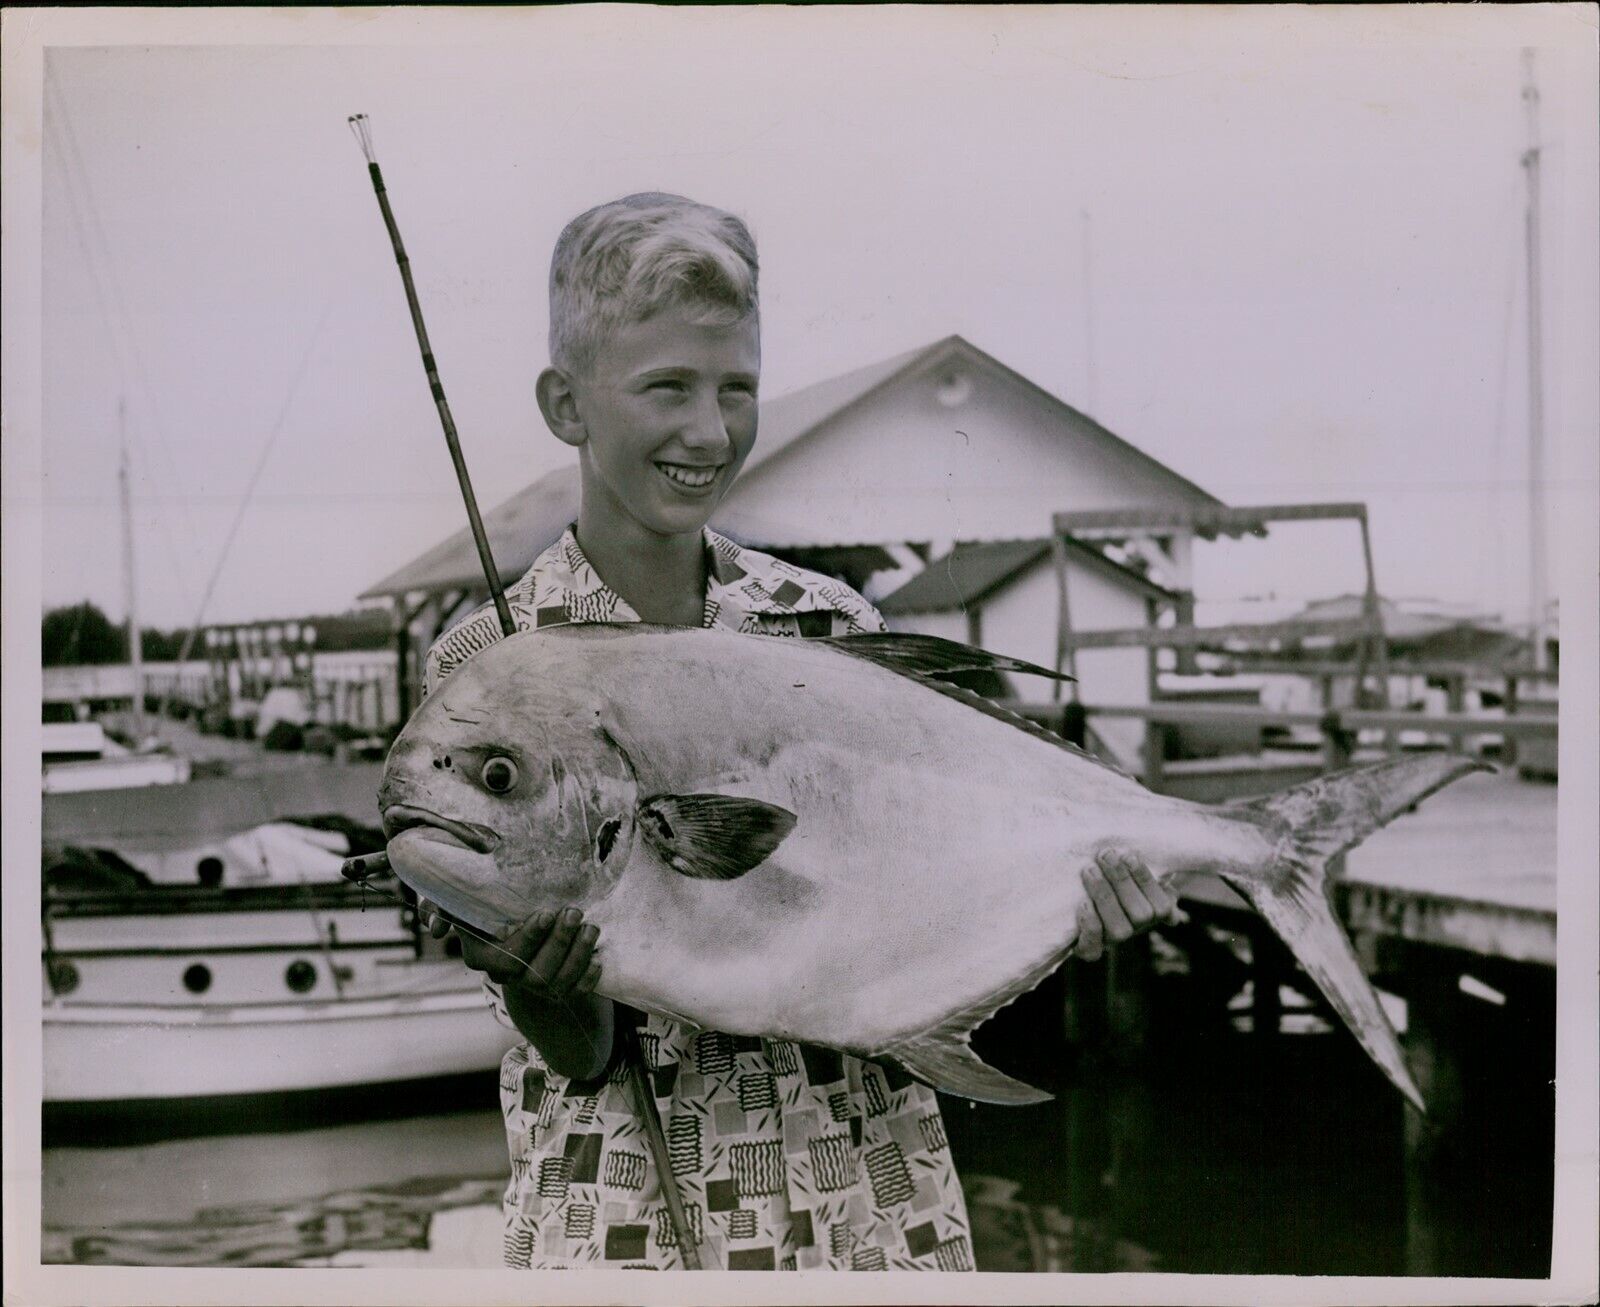 LG865 Orig Photo CATCH OF THE DAY Prize Fish Big Beast Young Boy Holding Trophy